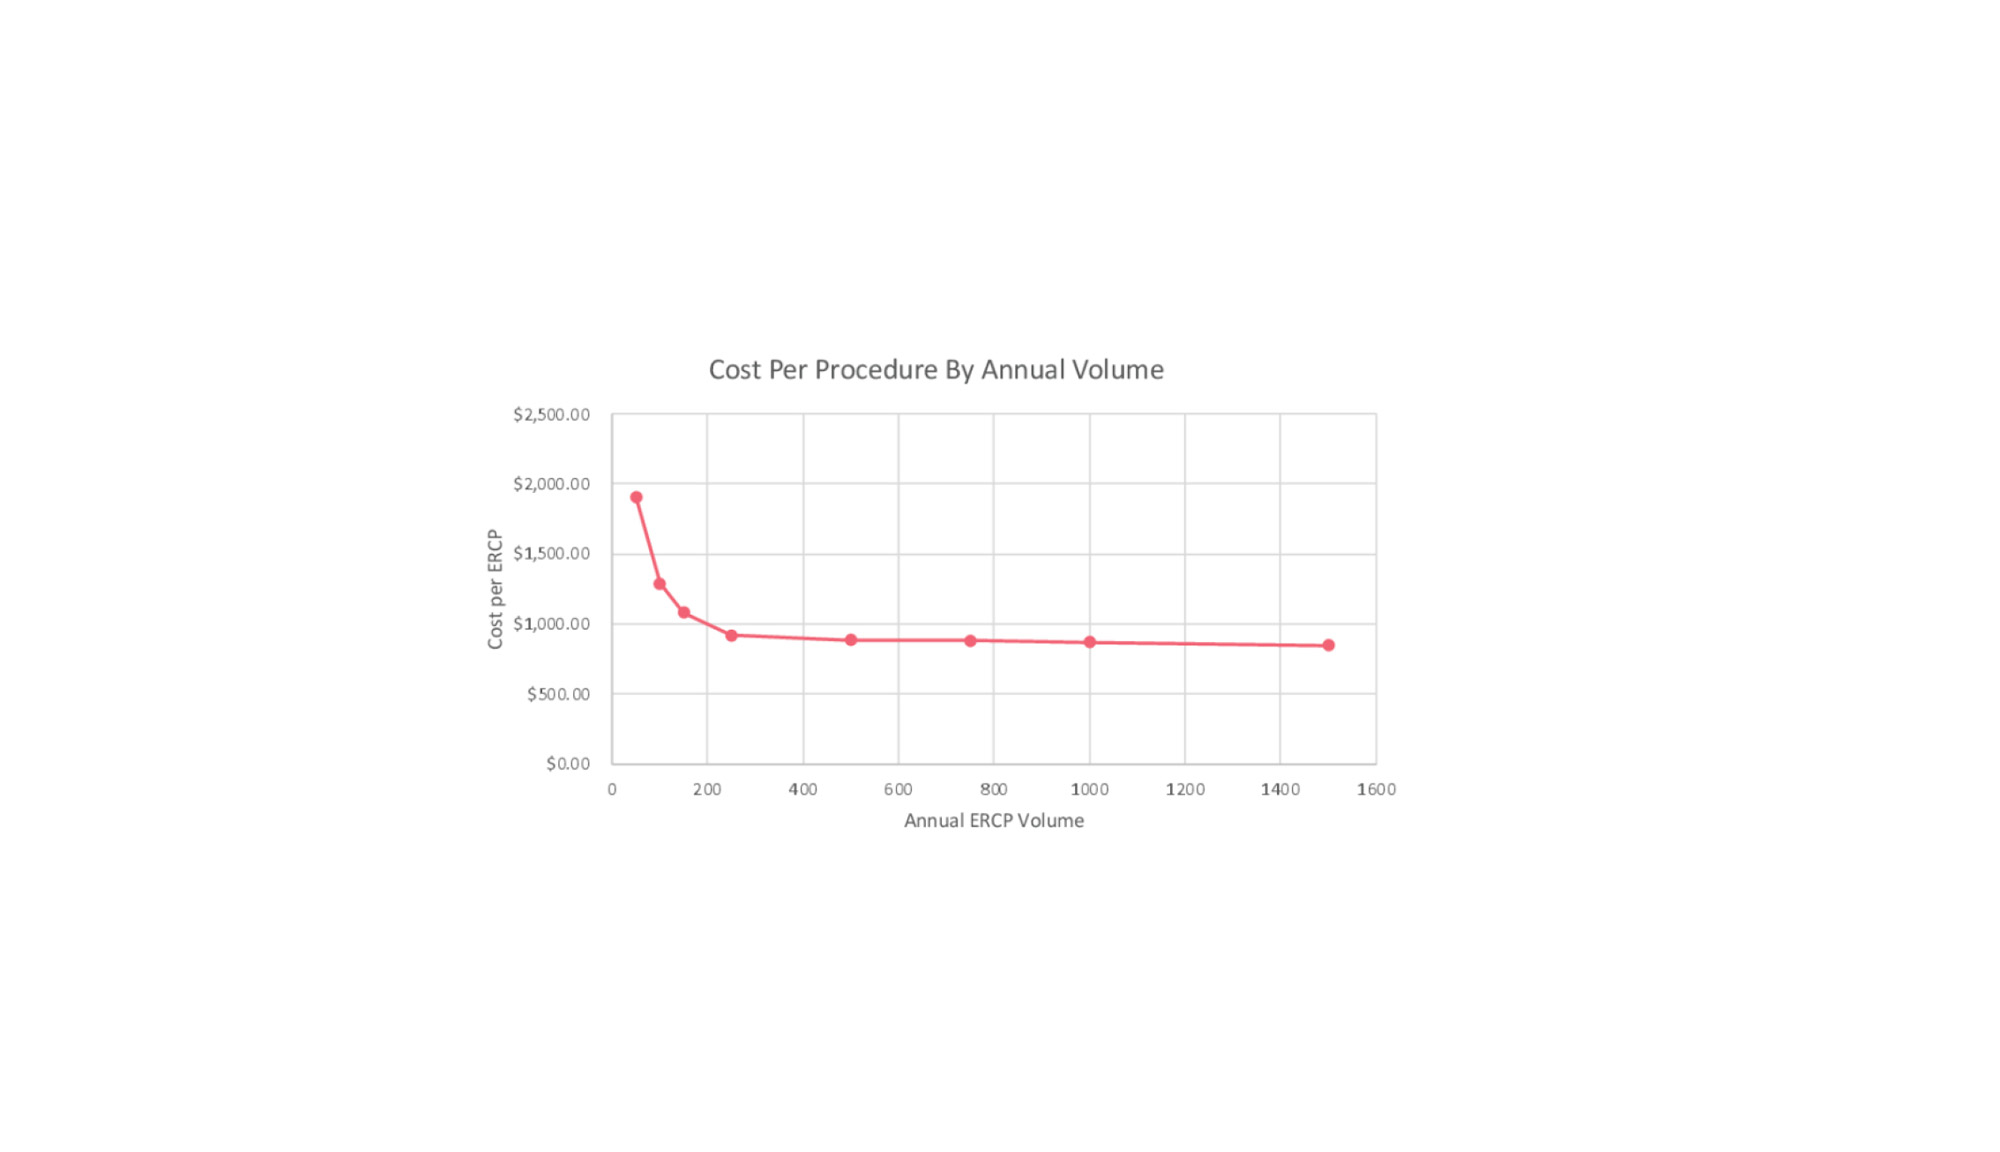 DDW 2023: How Much Does ERCP Cost With a Reusable Duodenoscope?